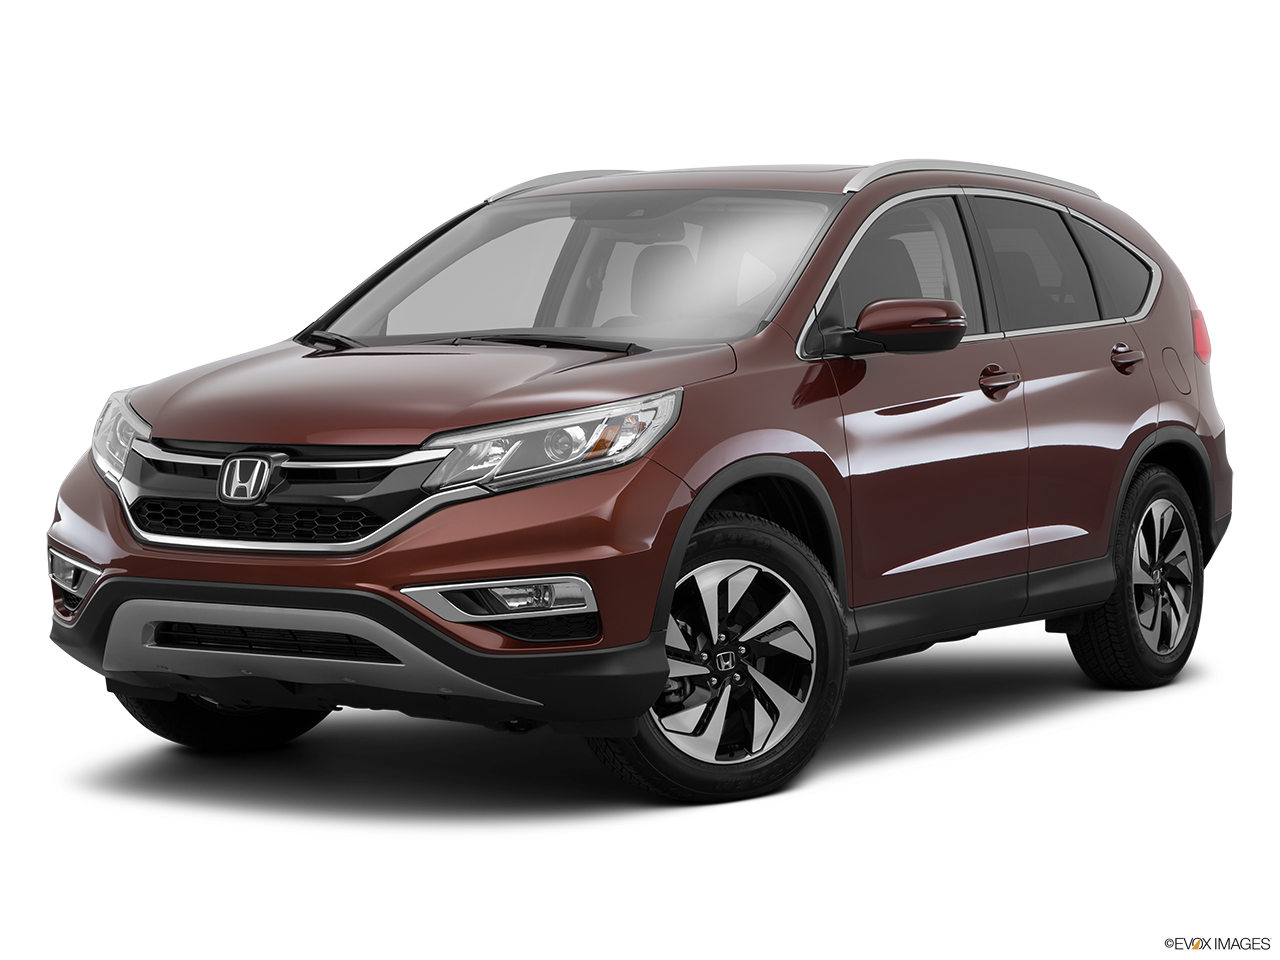 Collection of Honda Crv PNG. | PlusPNG